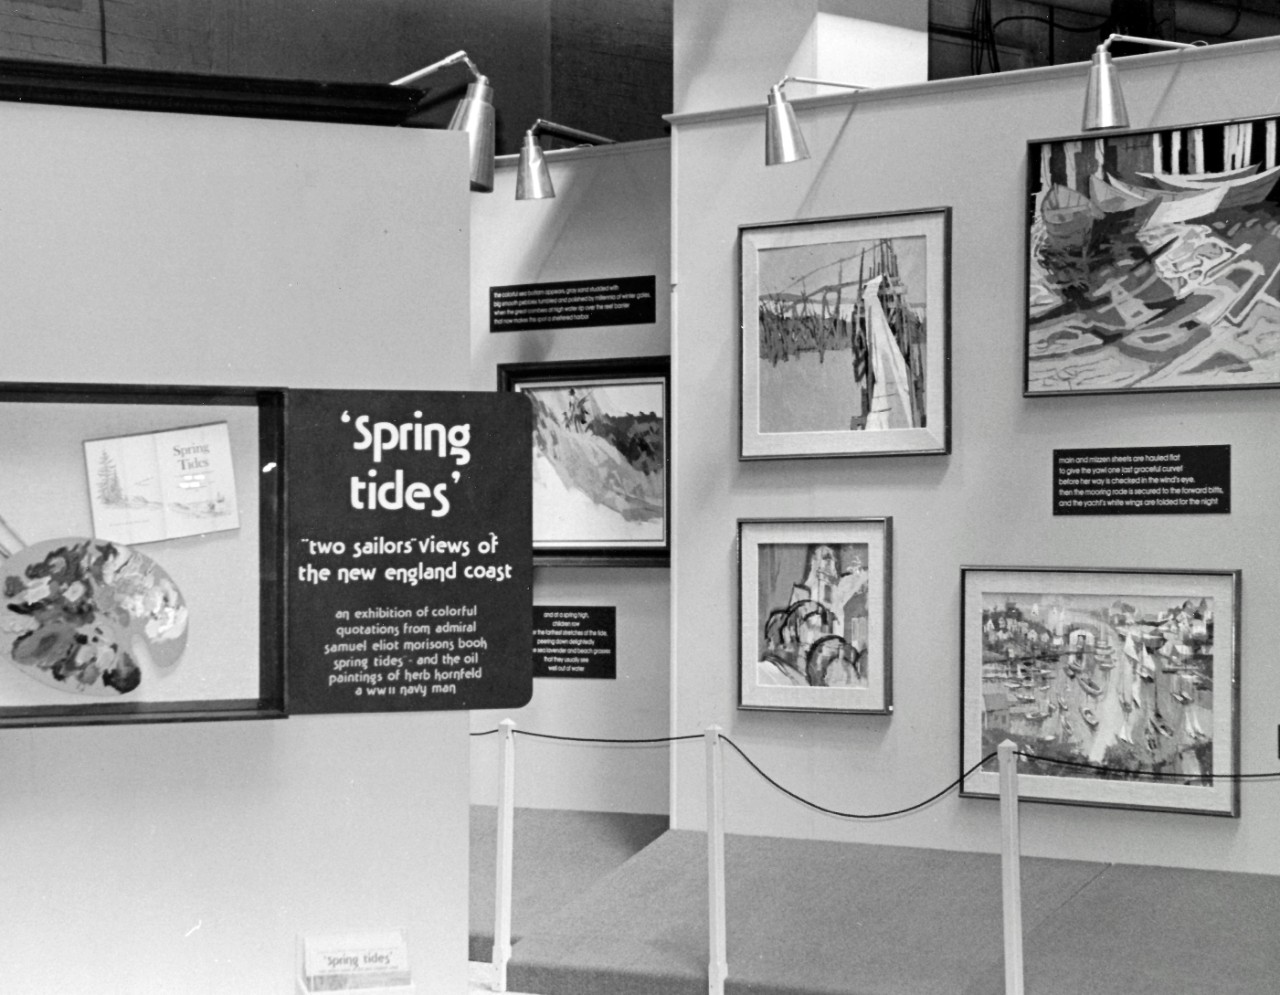 NMUSN-29: Sprint Tides Exhibit Area, 1979. National Museum of the U.S. Navy Photograph Collection.